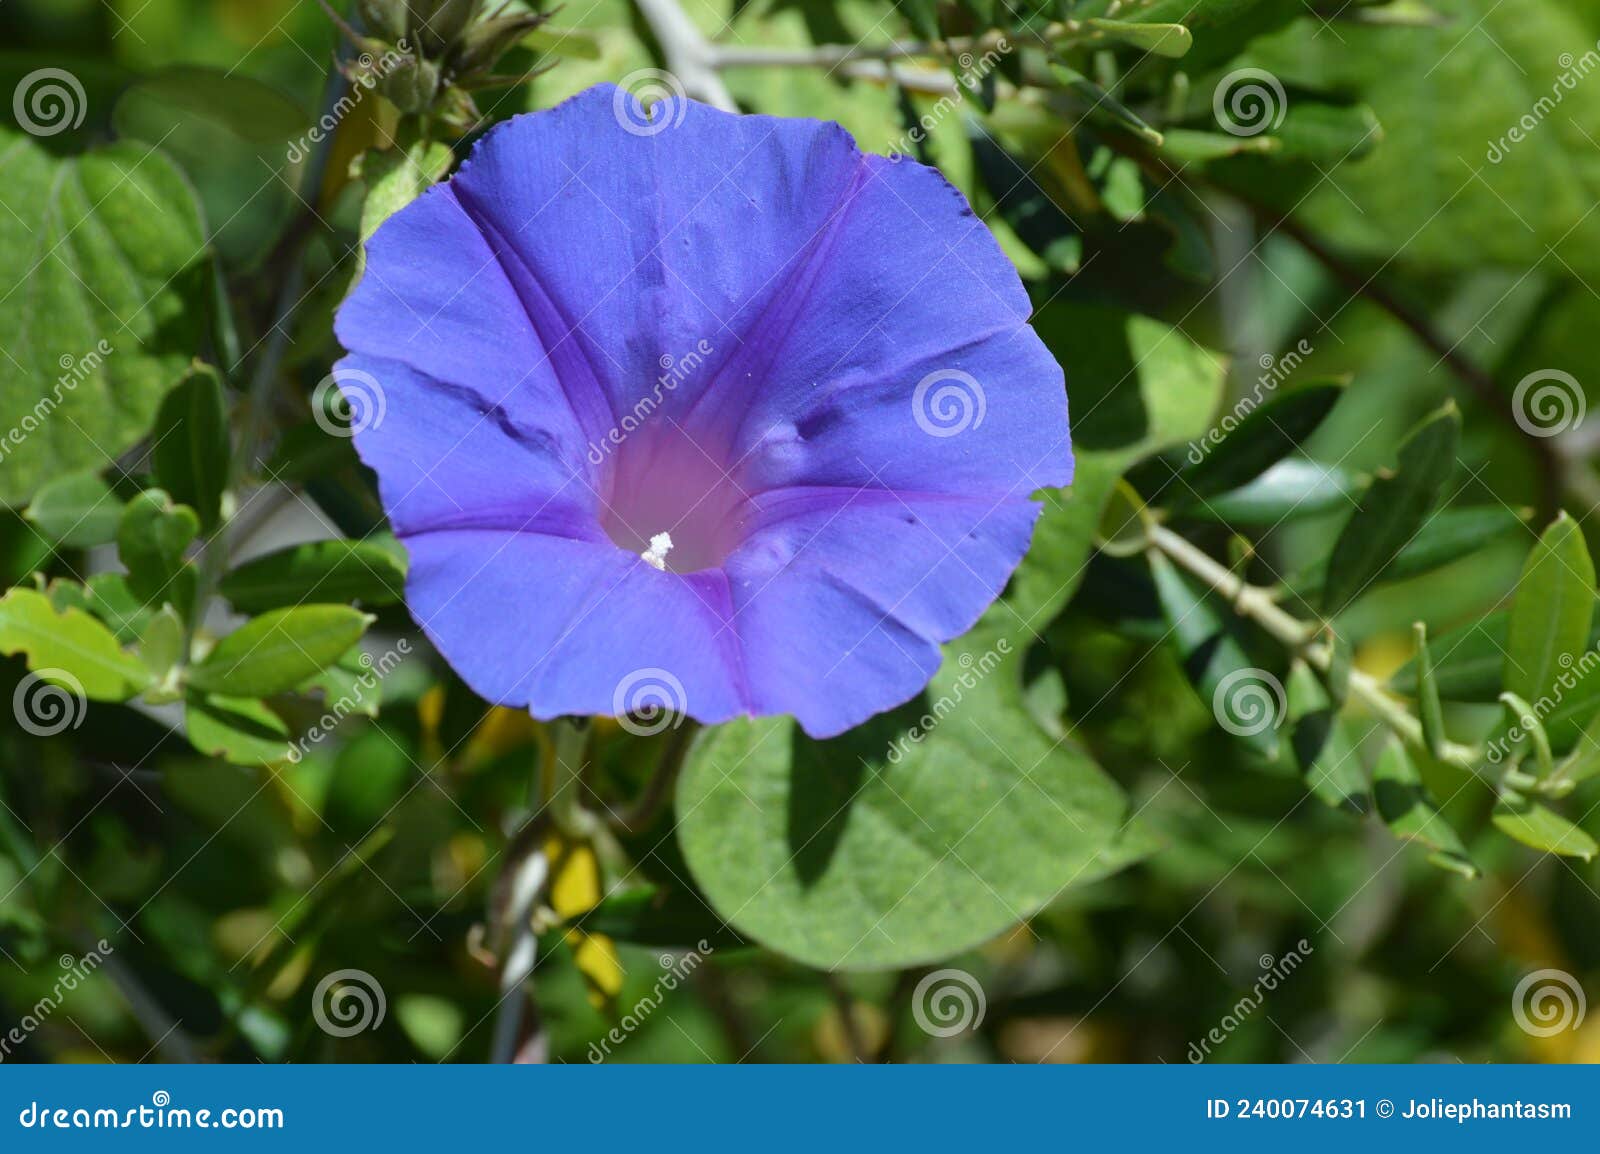 morning glory / ipomoea indica purple /violet flowers with green leaves. oke